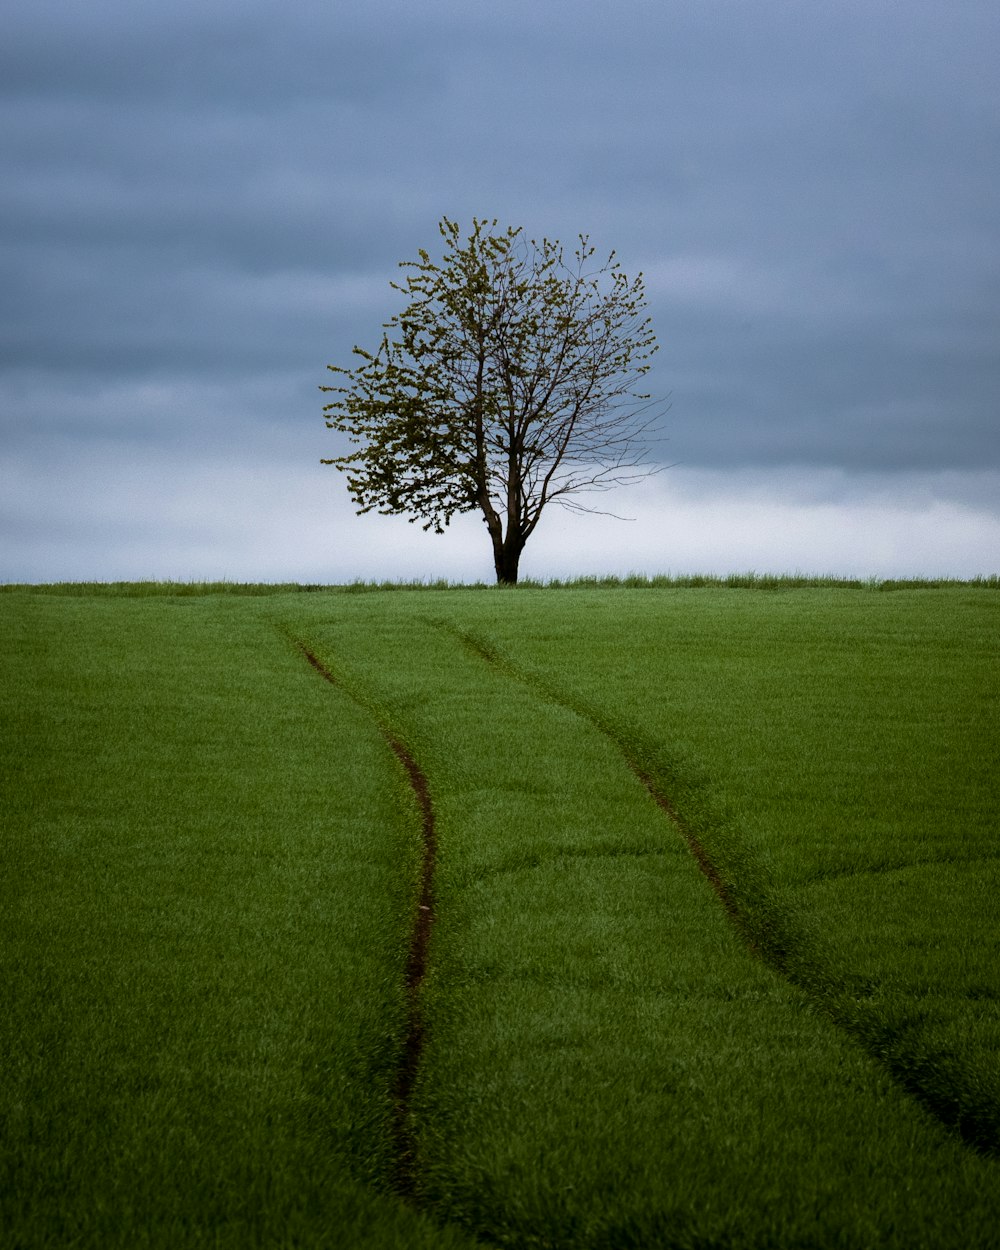 leafless tree on green grass field under cloudy sky during daytime